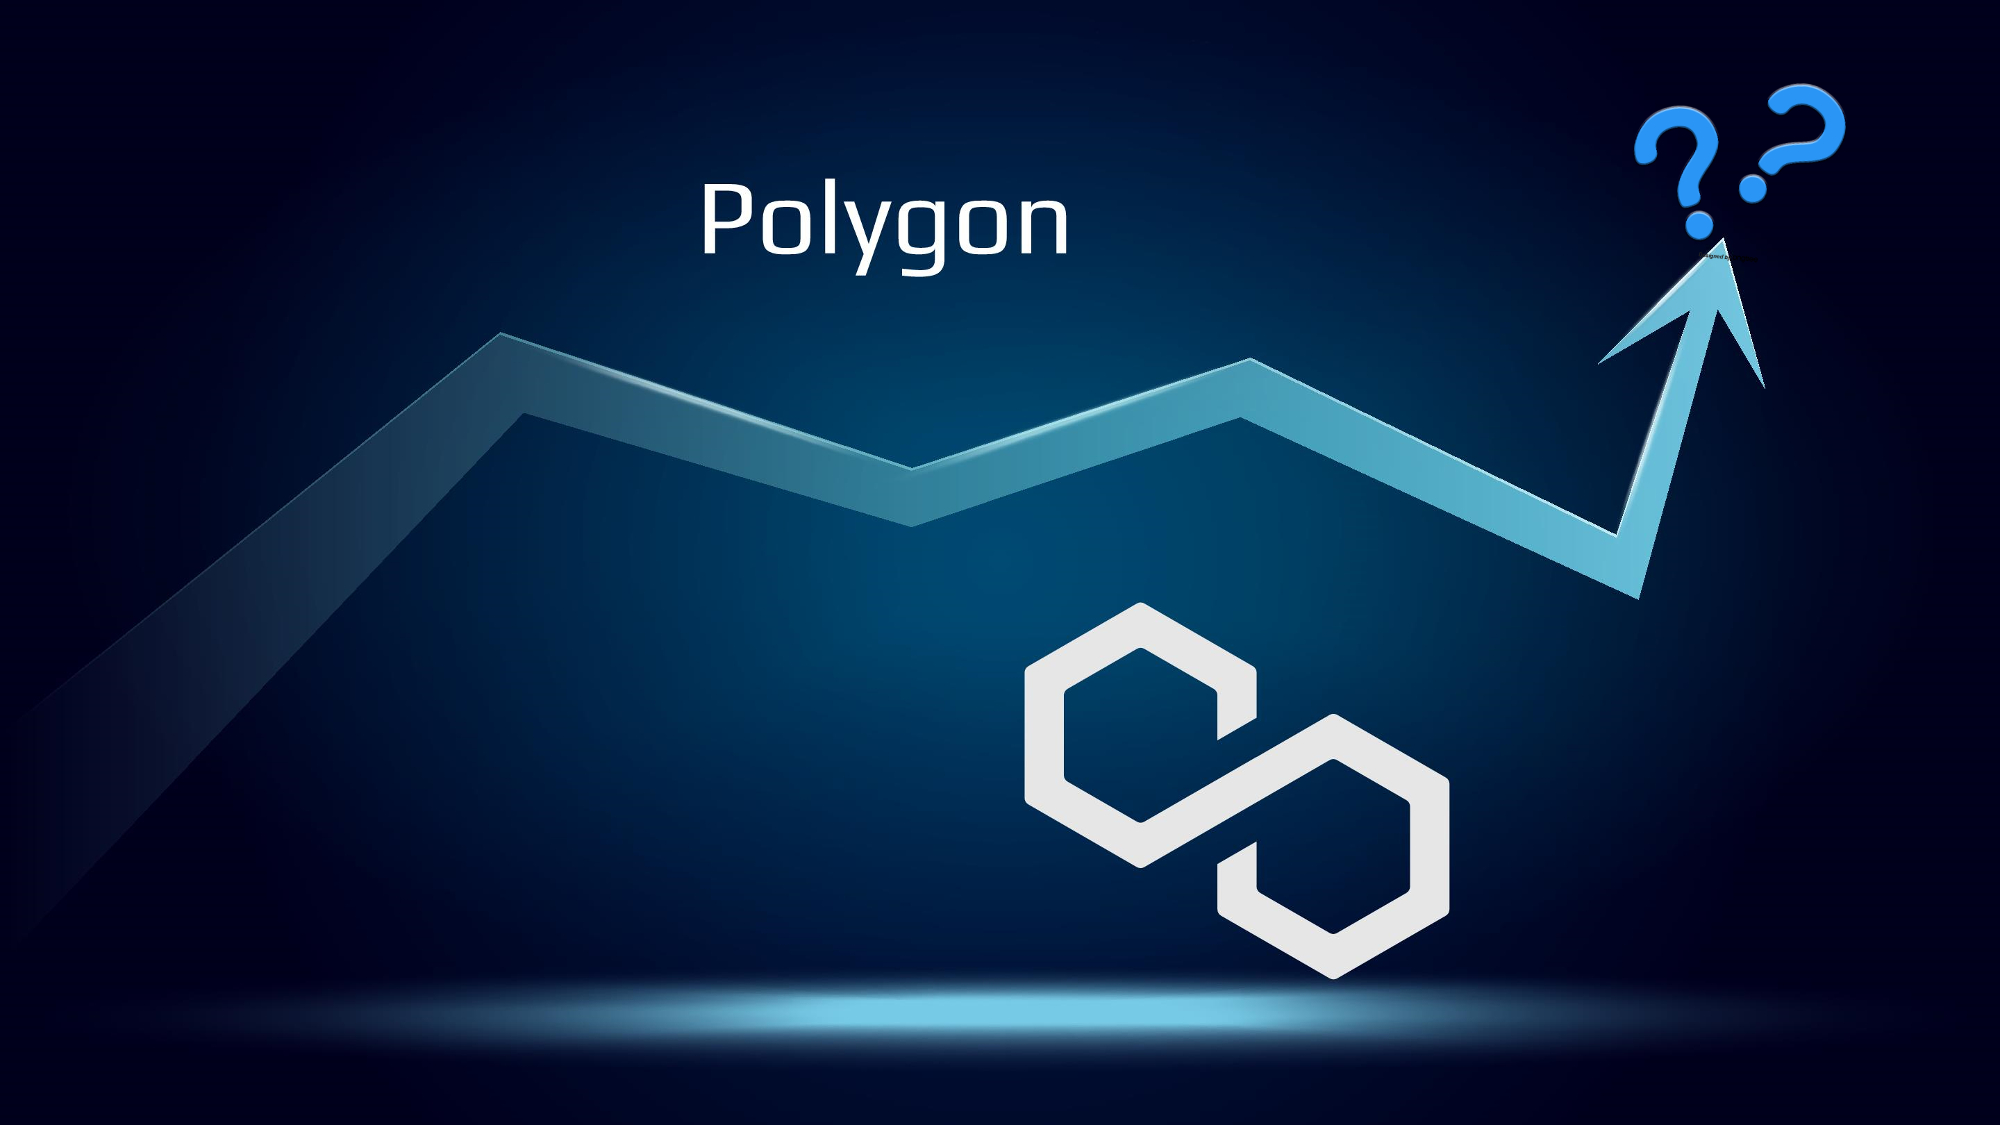 Polygon's multiple partnerships might make its token MATIC a buy in 2023